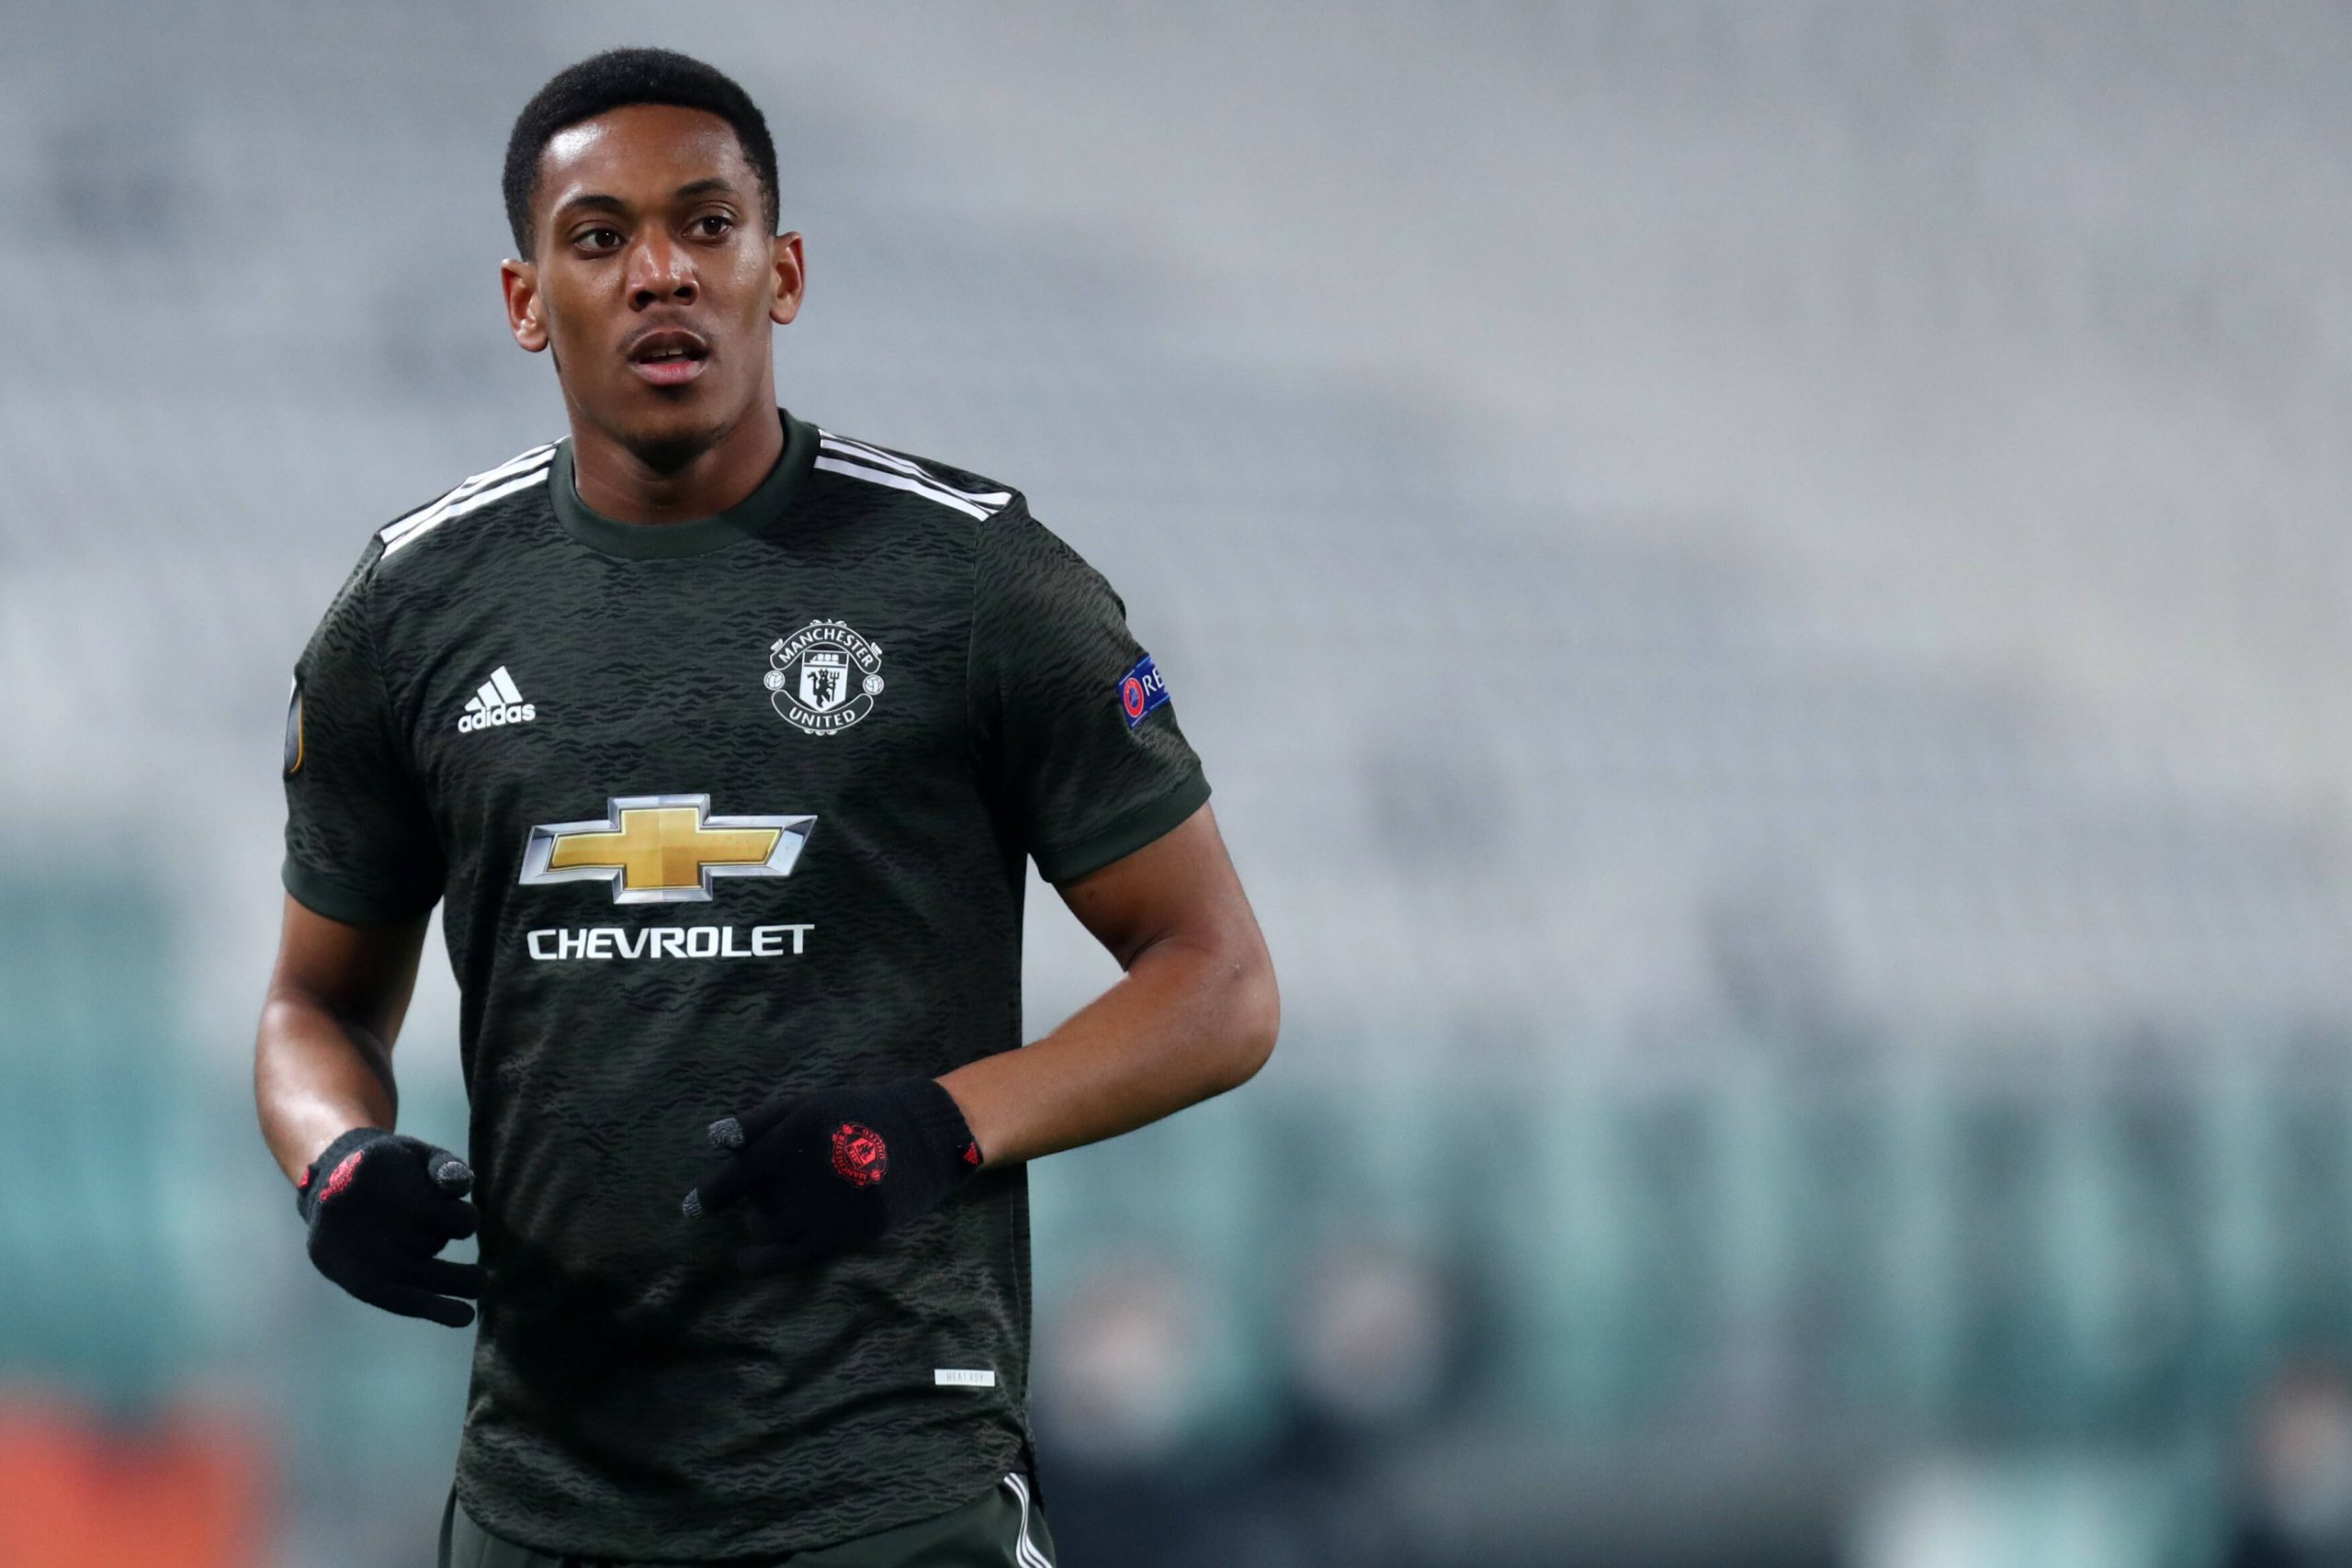 Manchester United striker, Anthony Martial, was in poor goal-scoring form last season.